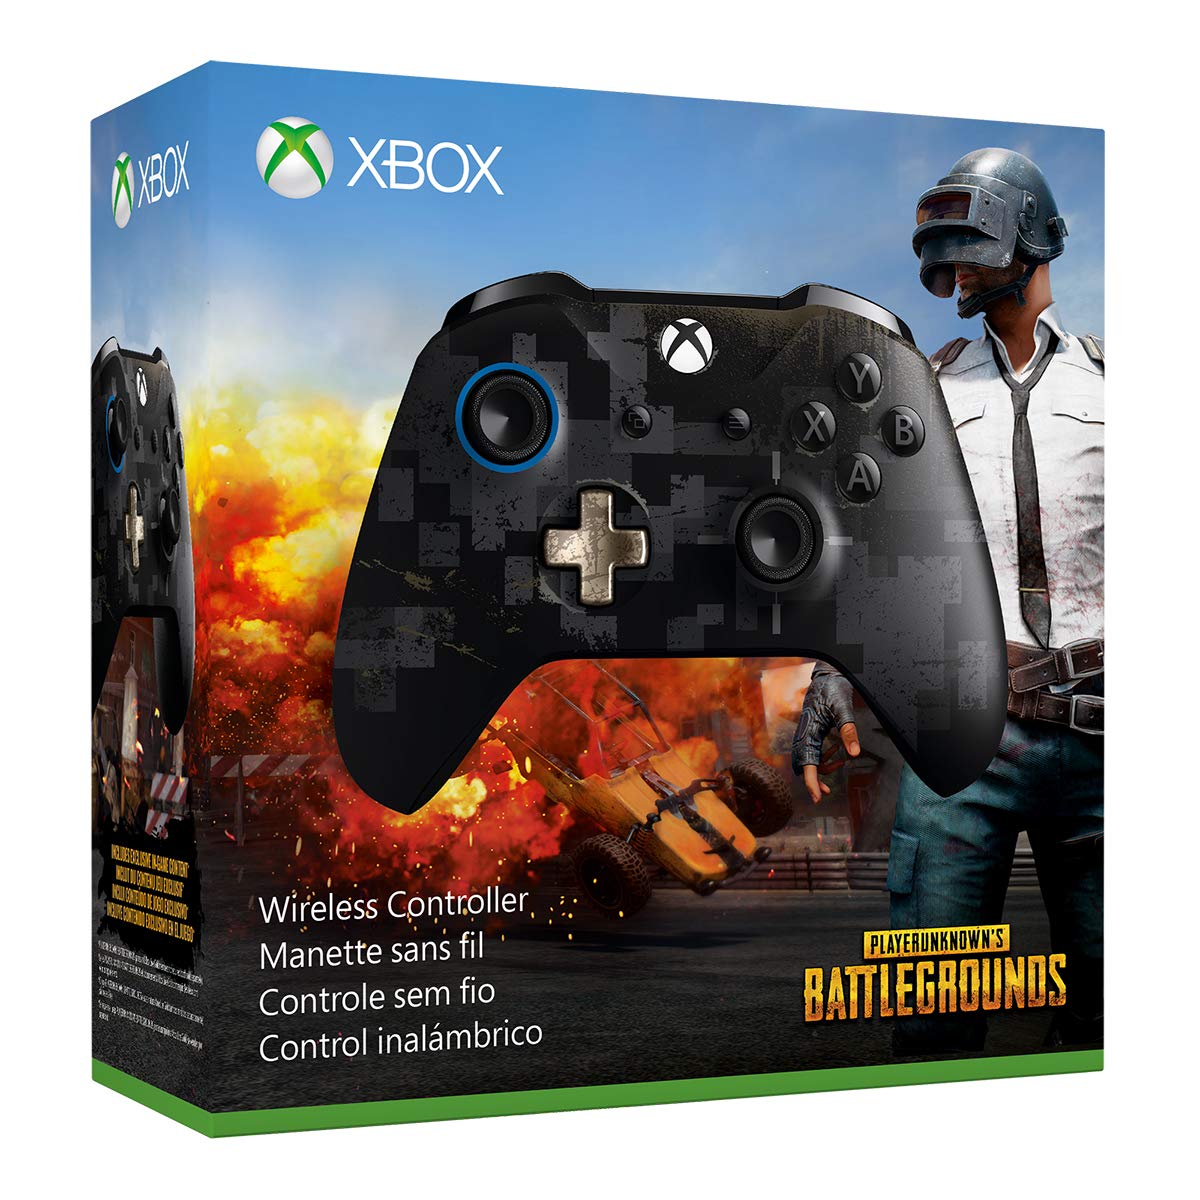 Xbox Wireless Controller - Playerunknown's Battlegrounds Limited - image 1 of 10